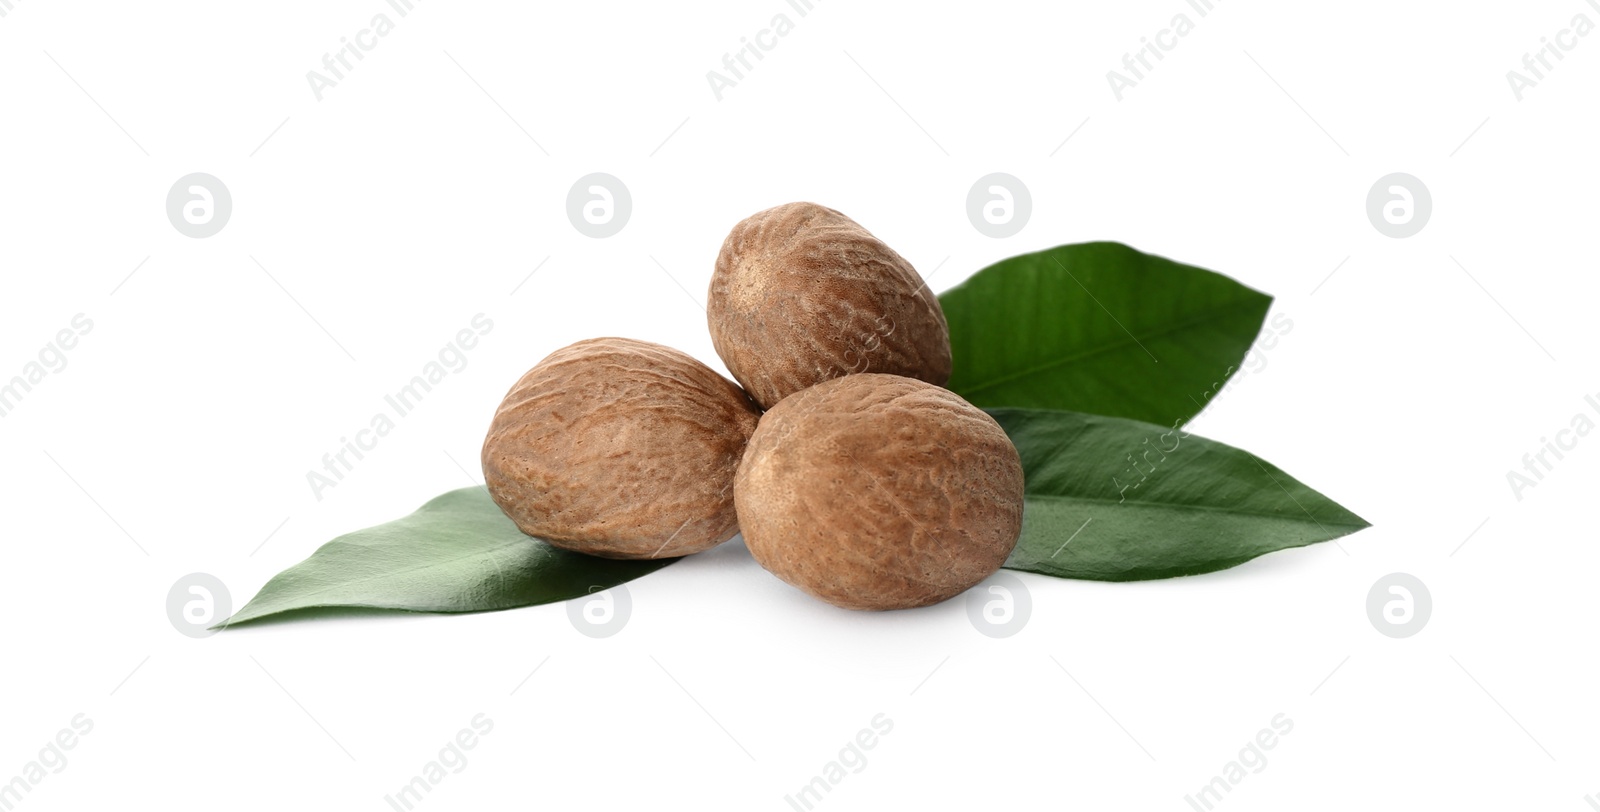 Photo of Nutmeg seeds with green leaves on white background